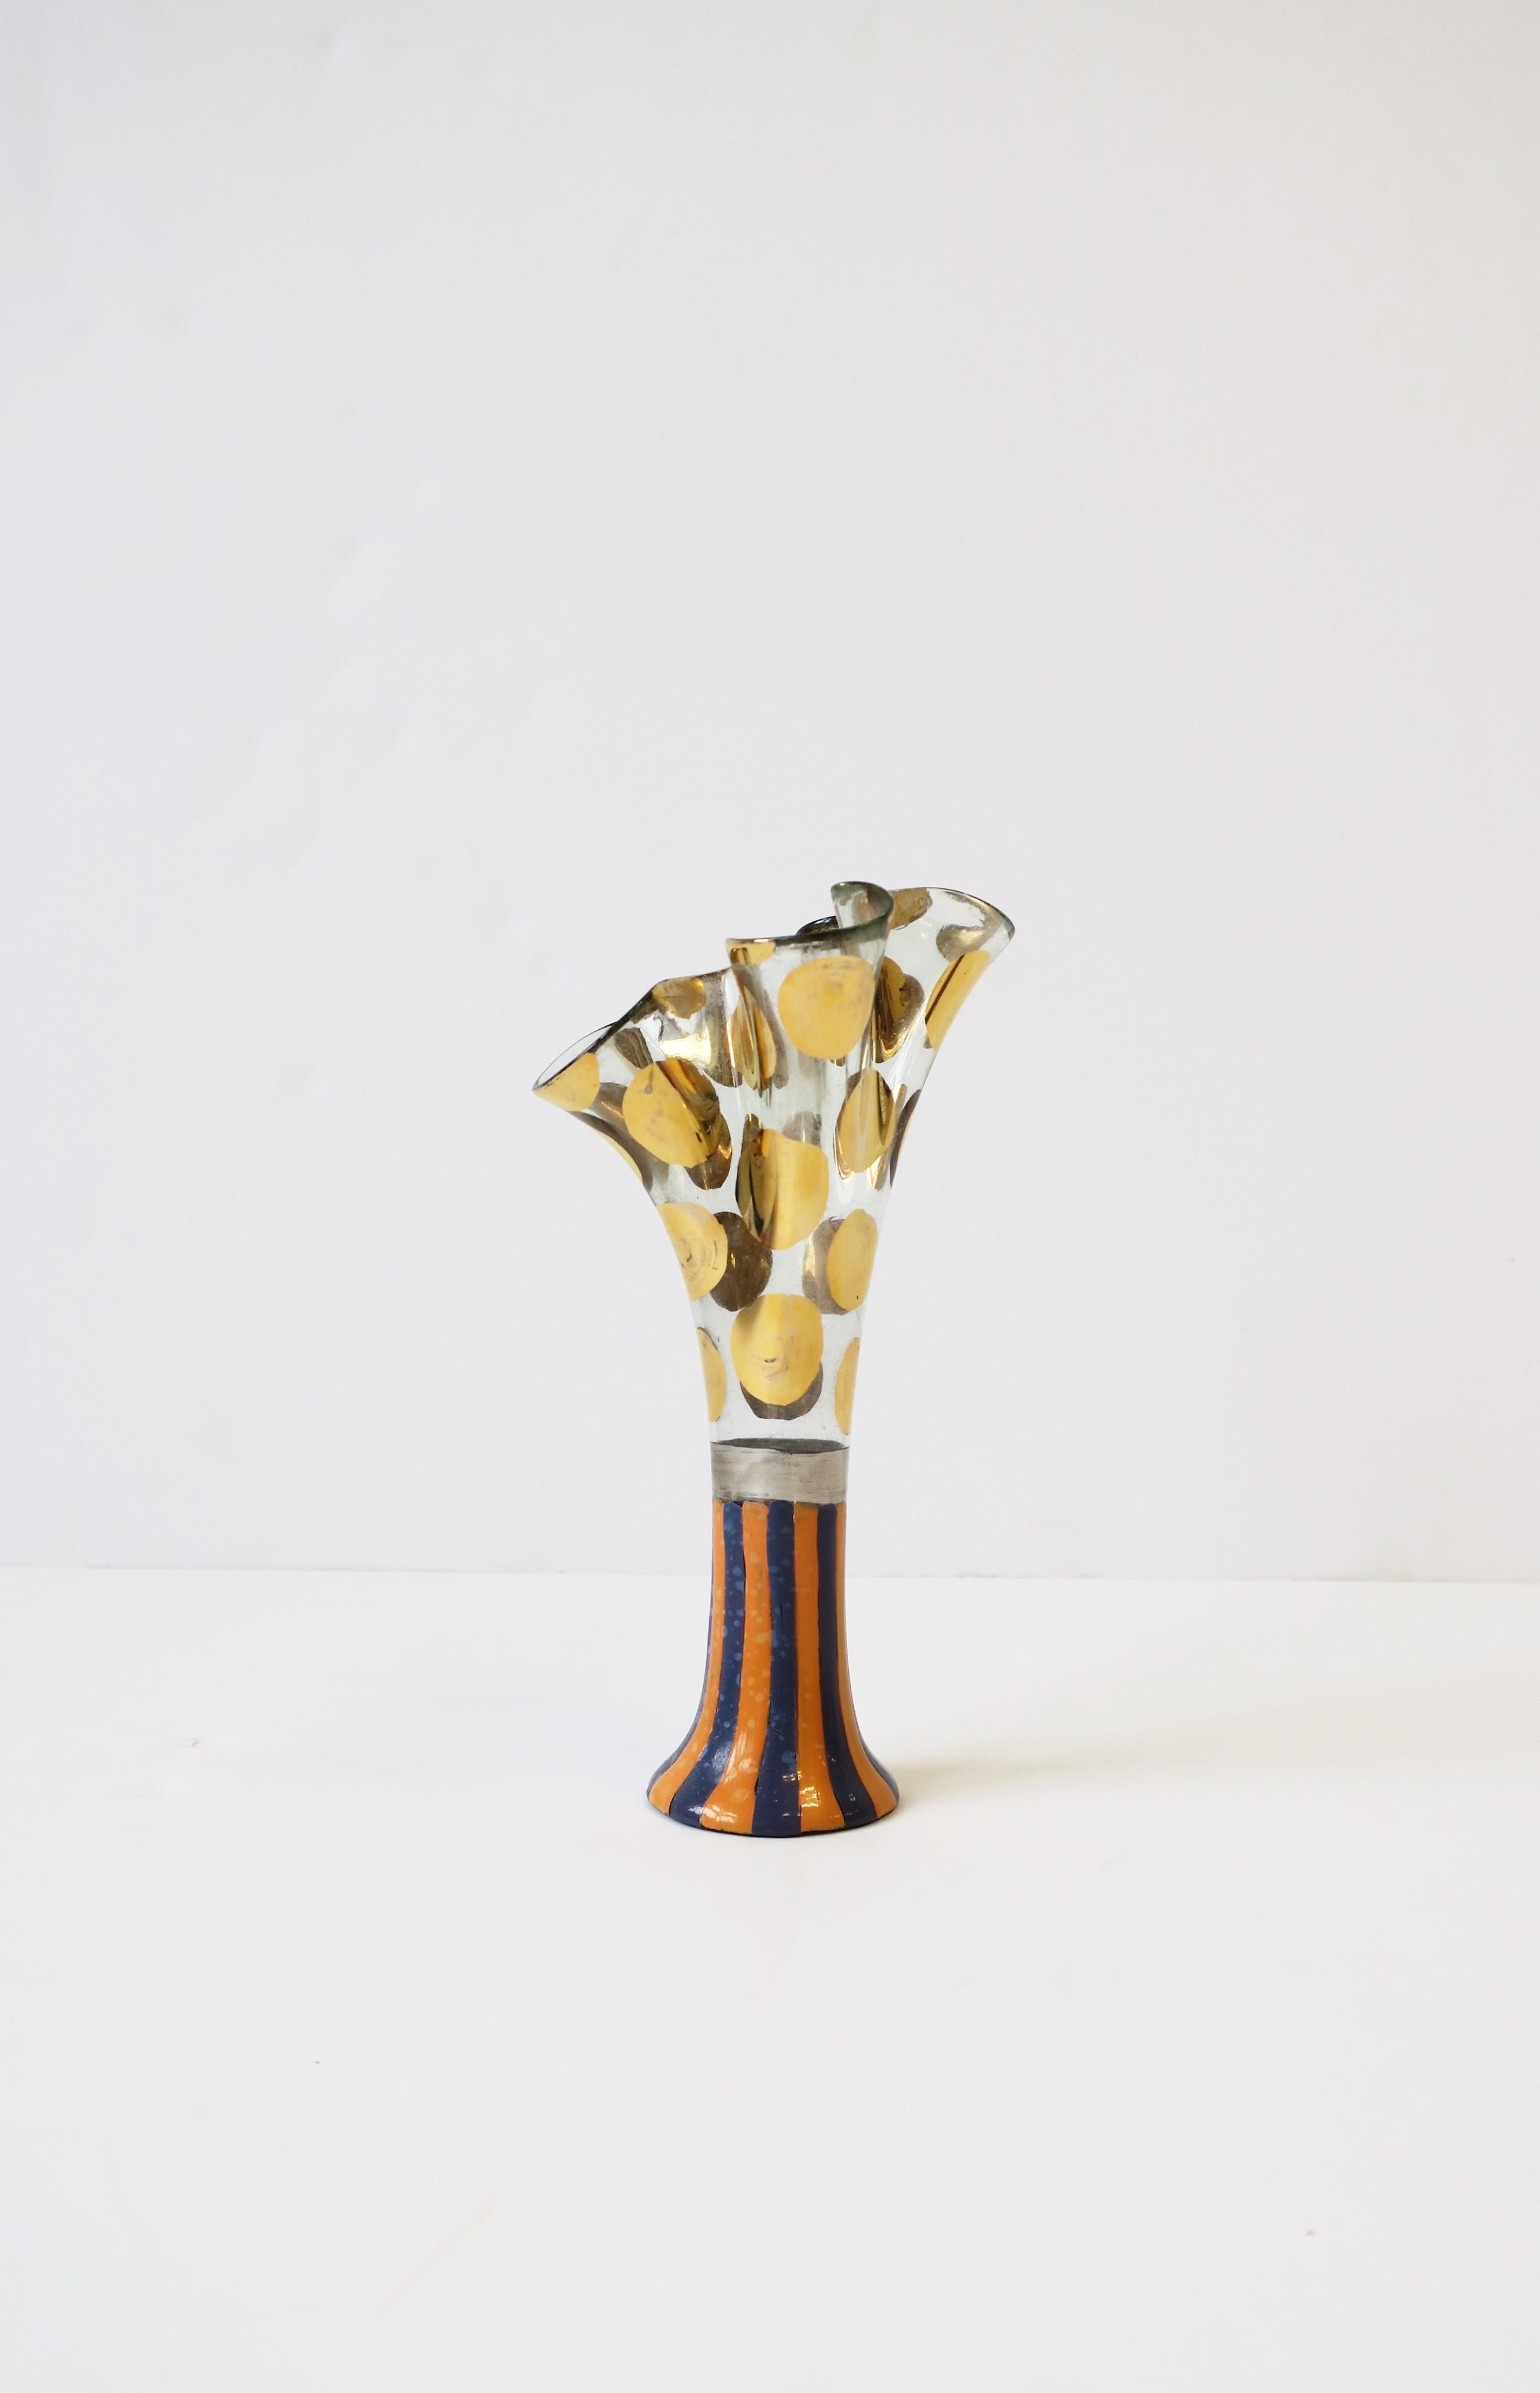 Mackenzie-Childs Art Glass Vase with Gold Polka Dots, circa 1980s For Sale 1